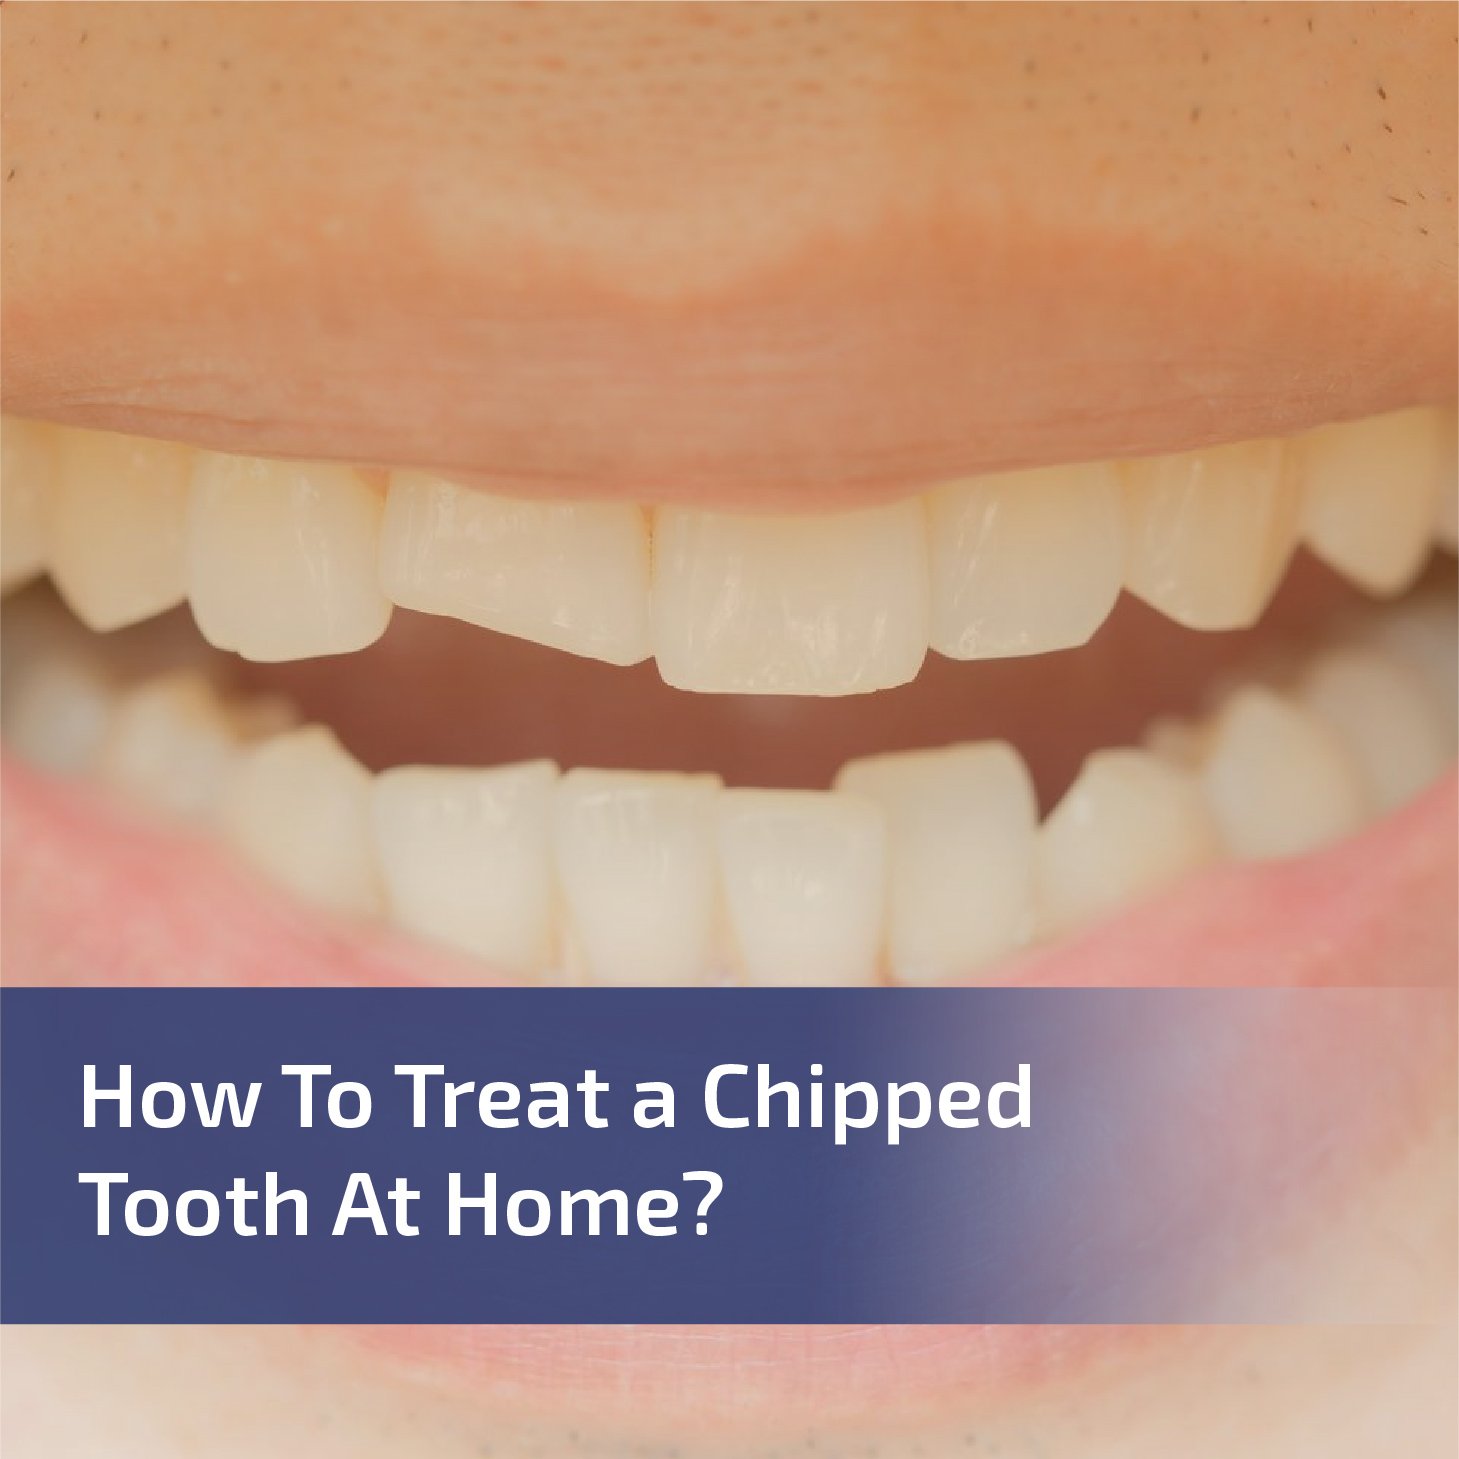 How to Treat a Chipped Tooth at Home